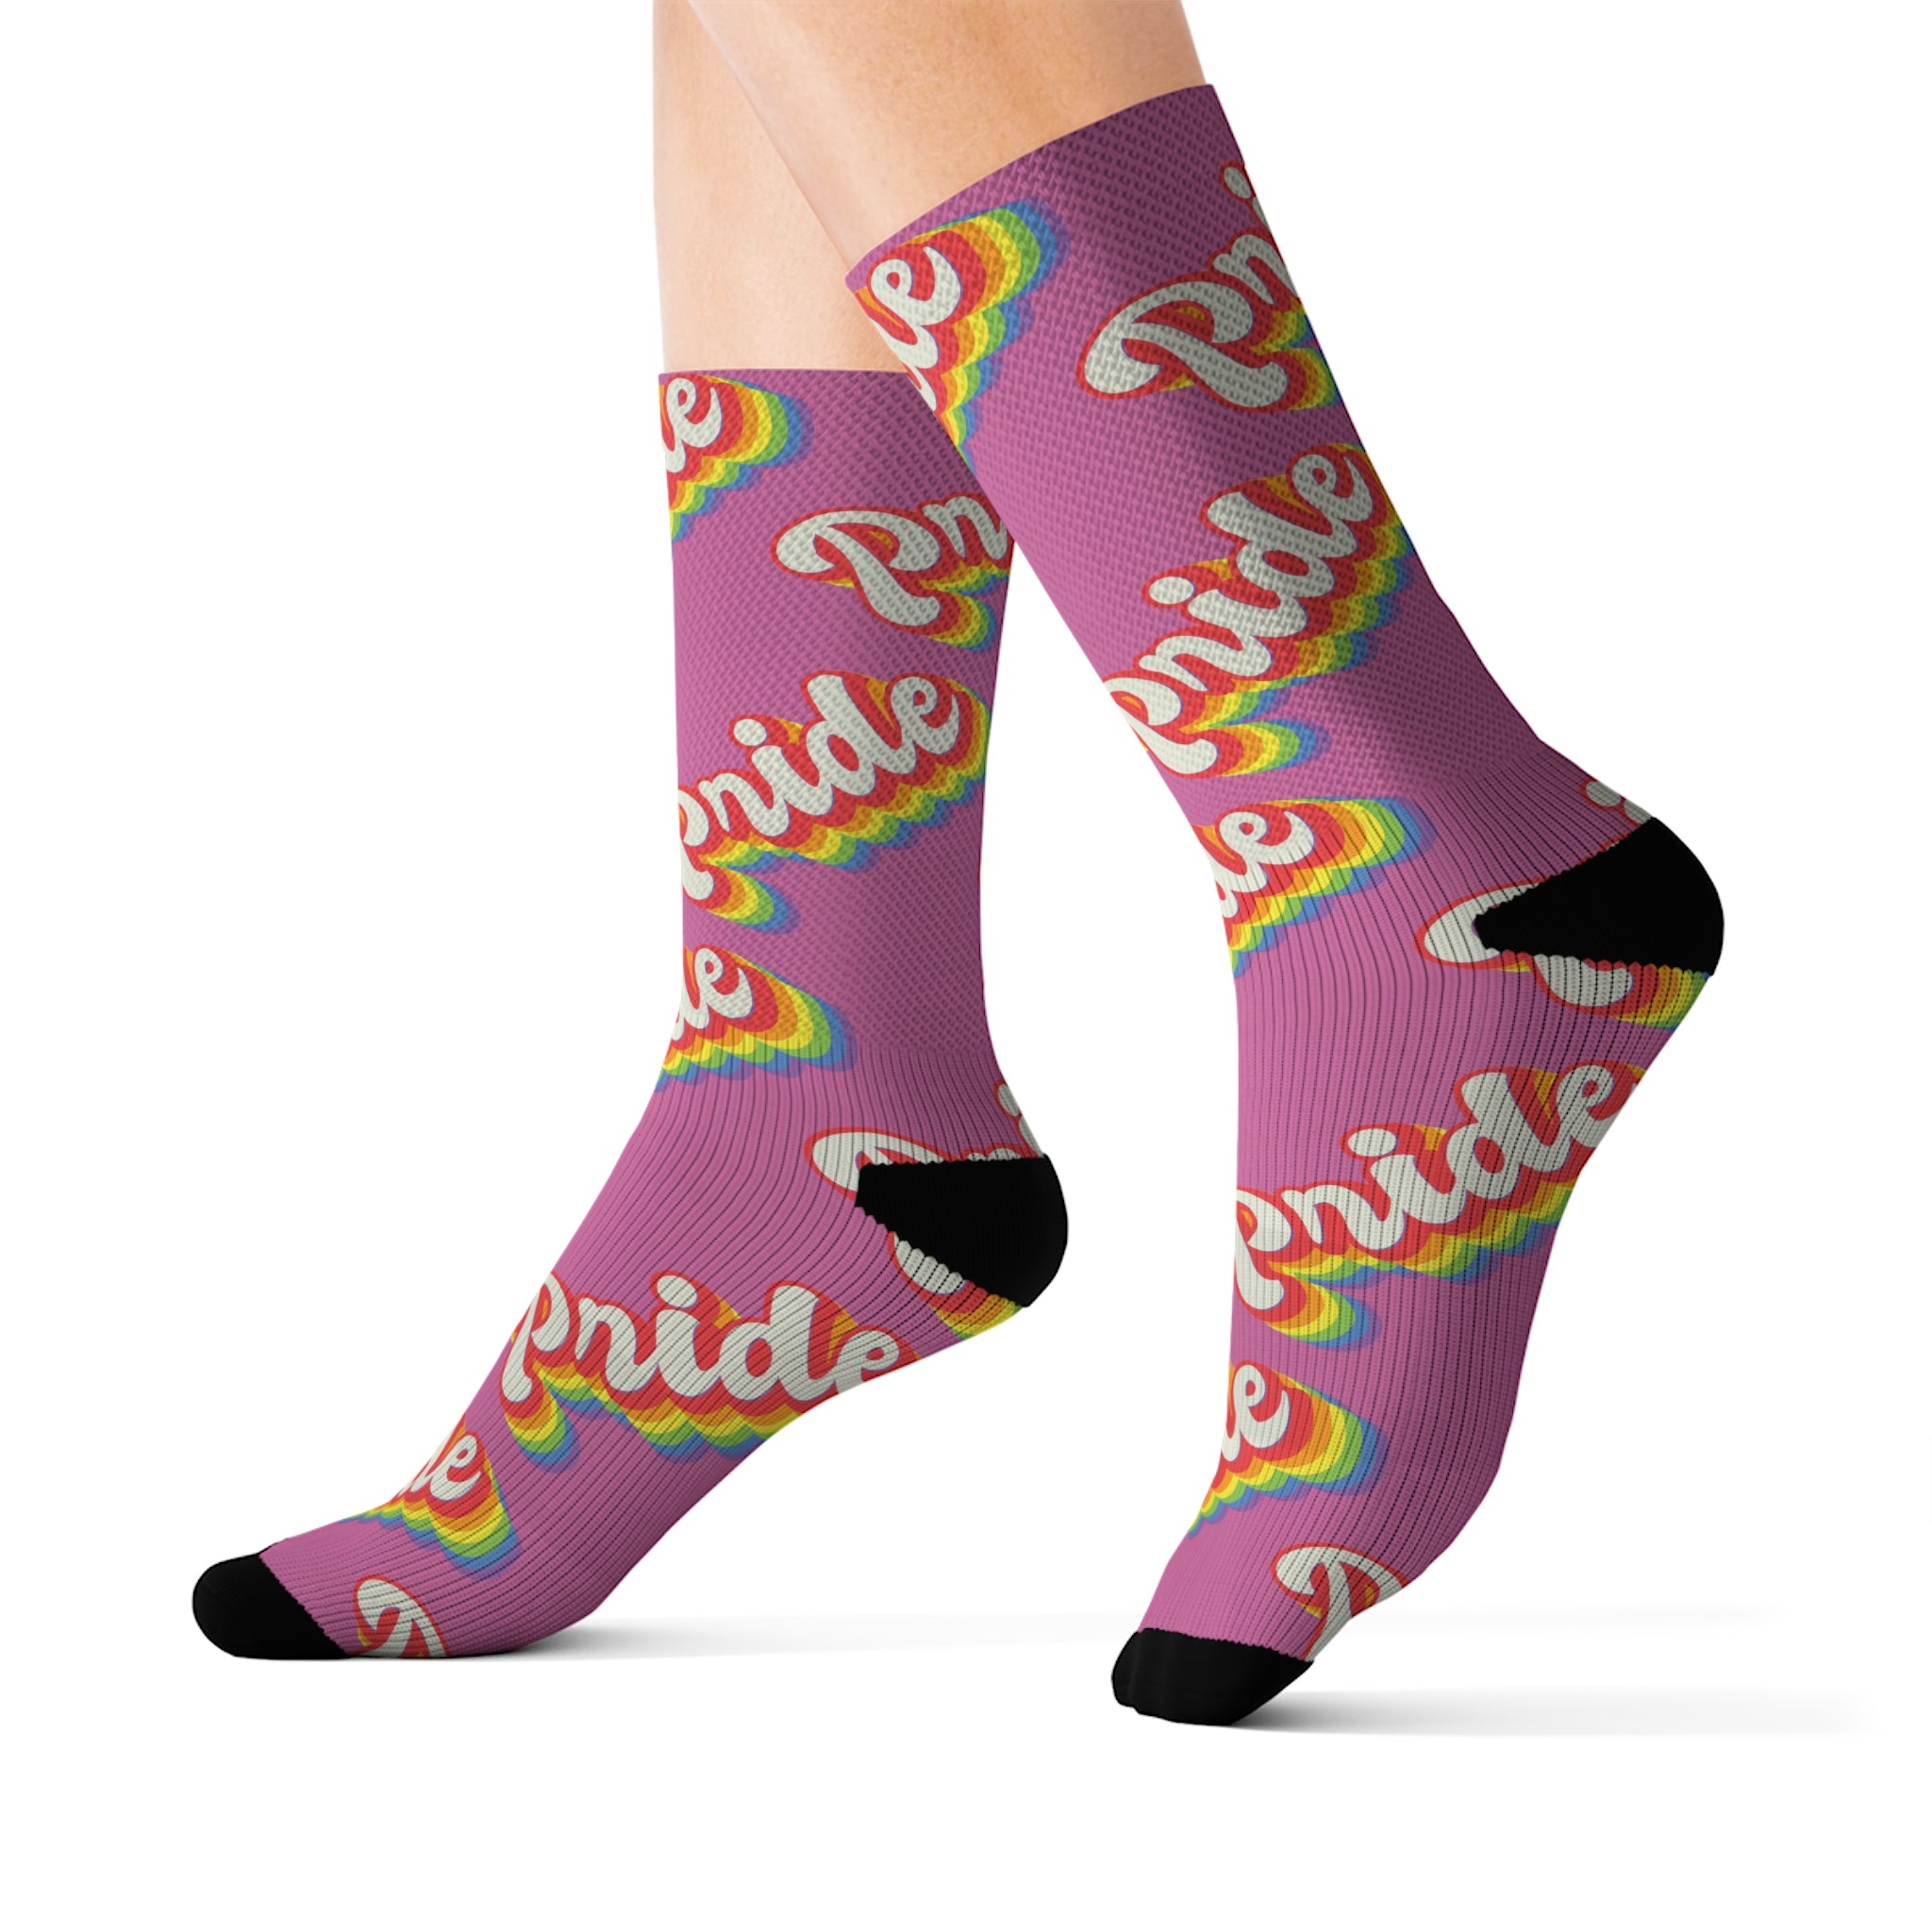 These Pride Socks feature a sublimated print of the word 'pride' and offer exceptional comfort.